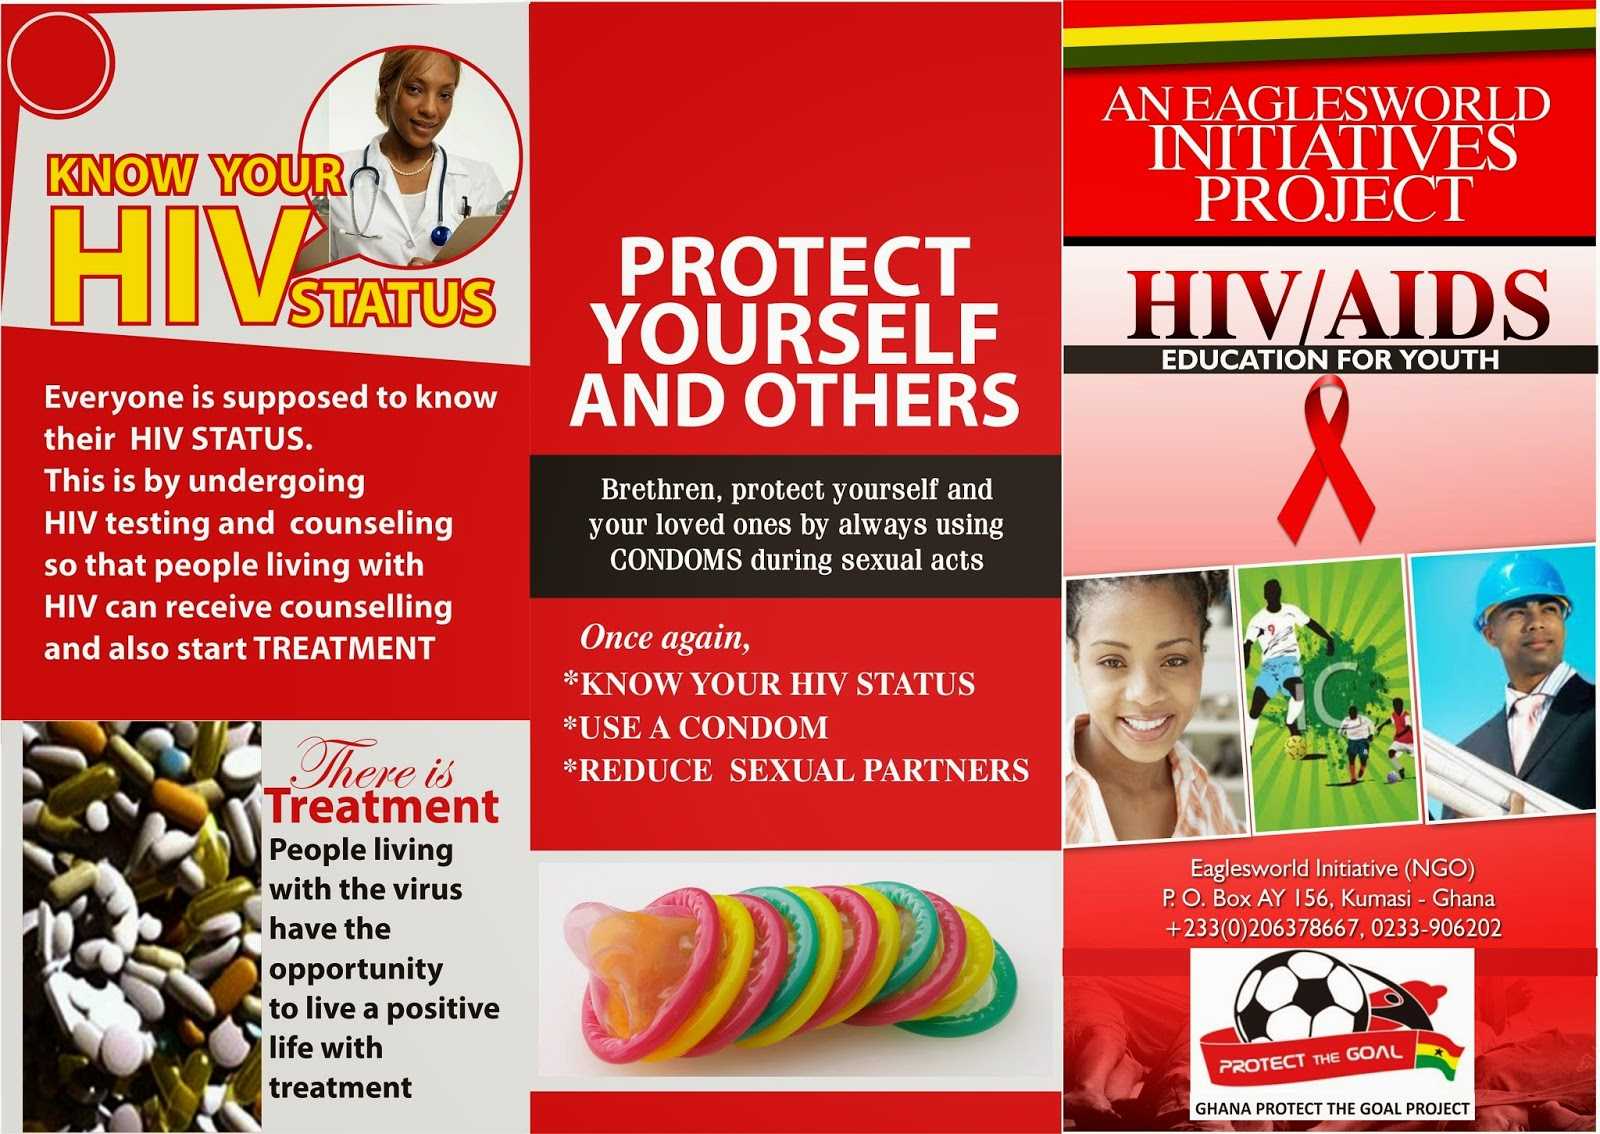 8 Best Photos Of Hiv Brochure Template - Hiv Aids Brochure Within Hiv Aids Brochure Templates